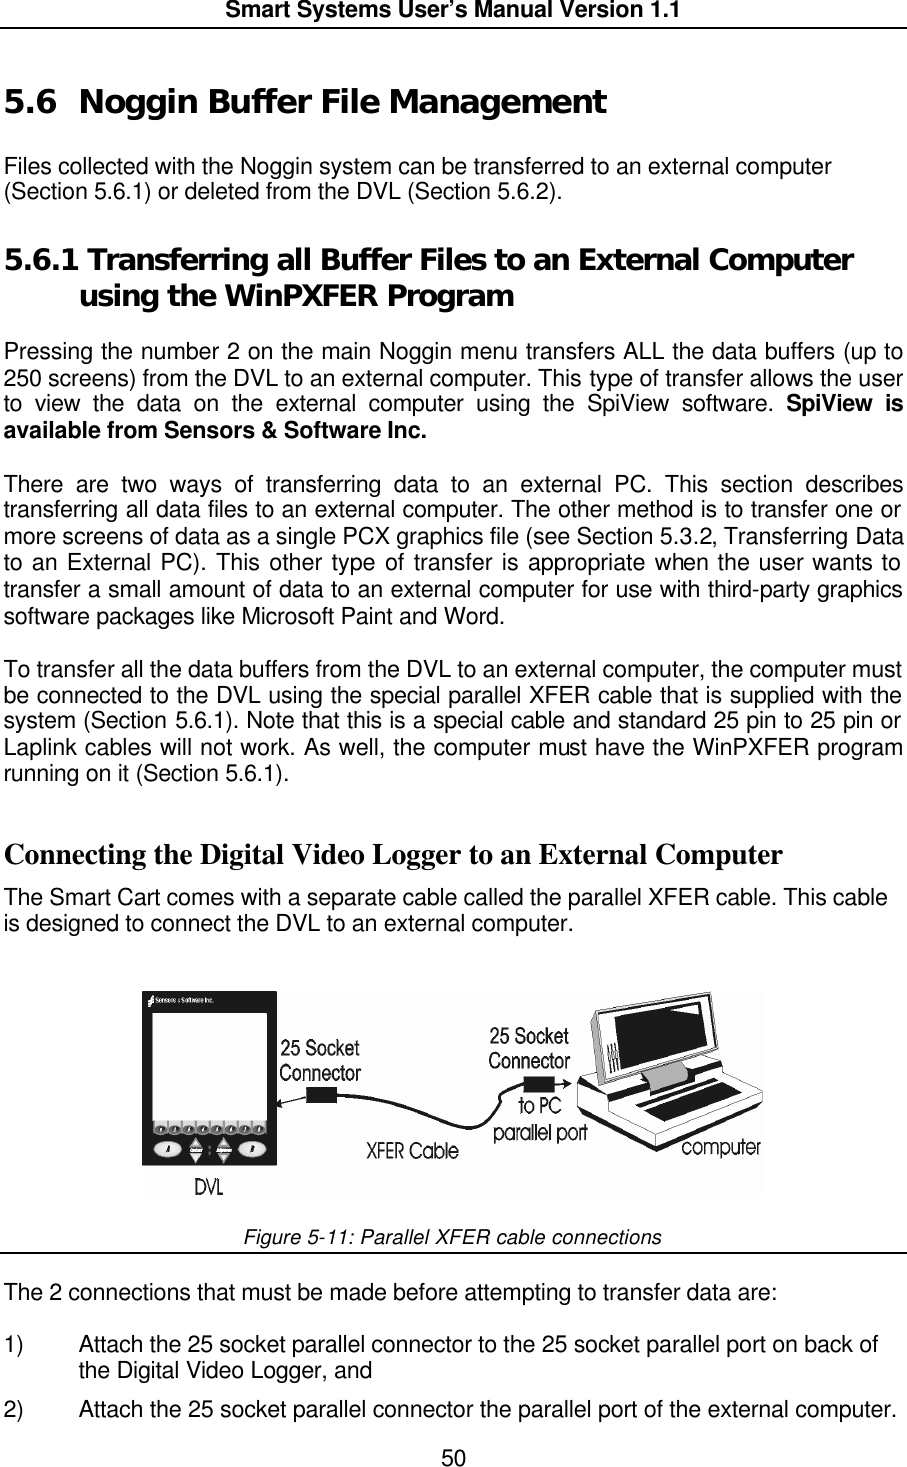  Smart Systems User’s Manual Version 1.1  50  5.6 Noggin Buffer File Management  Files collected with the Noggin system can be transferred to an external computer (Section 5.6.1) or deleted from the DVL (Section 5.6.2). 5.6.1  Transferring all Buffer Files to an External Computer using the WinPXFER Program  Pressing the number 2 on the main Noggin menu transfers ALL the data buffers (up to 250 screens) from the DVL to an external computer. This type of transfer allows the user to view the data on the external computer using the SpiView software. SpiView is available from Sensors &amp; Software Inc.  There are two ways of transferring data to an external PC. This section describes transferring all data files to an external computer. The other method is to transfer one or more screens of data as a single PCX graphics file (see Section 5.3.2, Transferring Data to an External PC). This other type of transfer is appropriate when the user wants to transfer a small amount of data to an external computer for use with third-party graphics software packages like Microsoft Paint and Word.  To transfer all the data buffers from the DVL to an external computer, the computer must be connected to the DVL using the special parallel XFER cable that is supplied with the system (Section 5.6.1). Note that this is a special cable and standard 25 pin to 25 pin or Laplink cables will not work. As well, the computer must have the WinPXFER program running on it (Section 5.6.1).  Connecting the Digital Video Logger to an External Computer The Smart Cart comes with a separate cable called the parallel XFER cable. This cable is designed to connect the DVL to an external computer.    Figure 5-11: Parallel XFER cable connections  The 2 connections that must be made before attempting to transfer data are:   1) Attach the 25 socket parallel connector to the 25 socket parallel port on back of the Digital Video Logger, and 2) Attach the 25 socket parallel connector the parallel port of the external computer.  